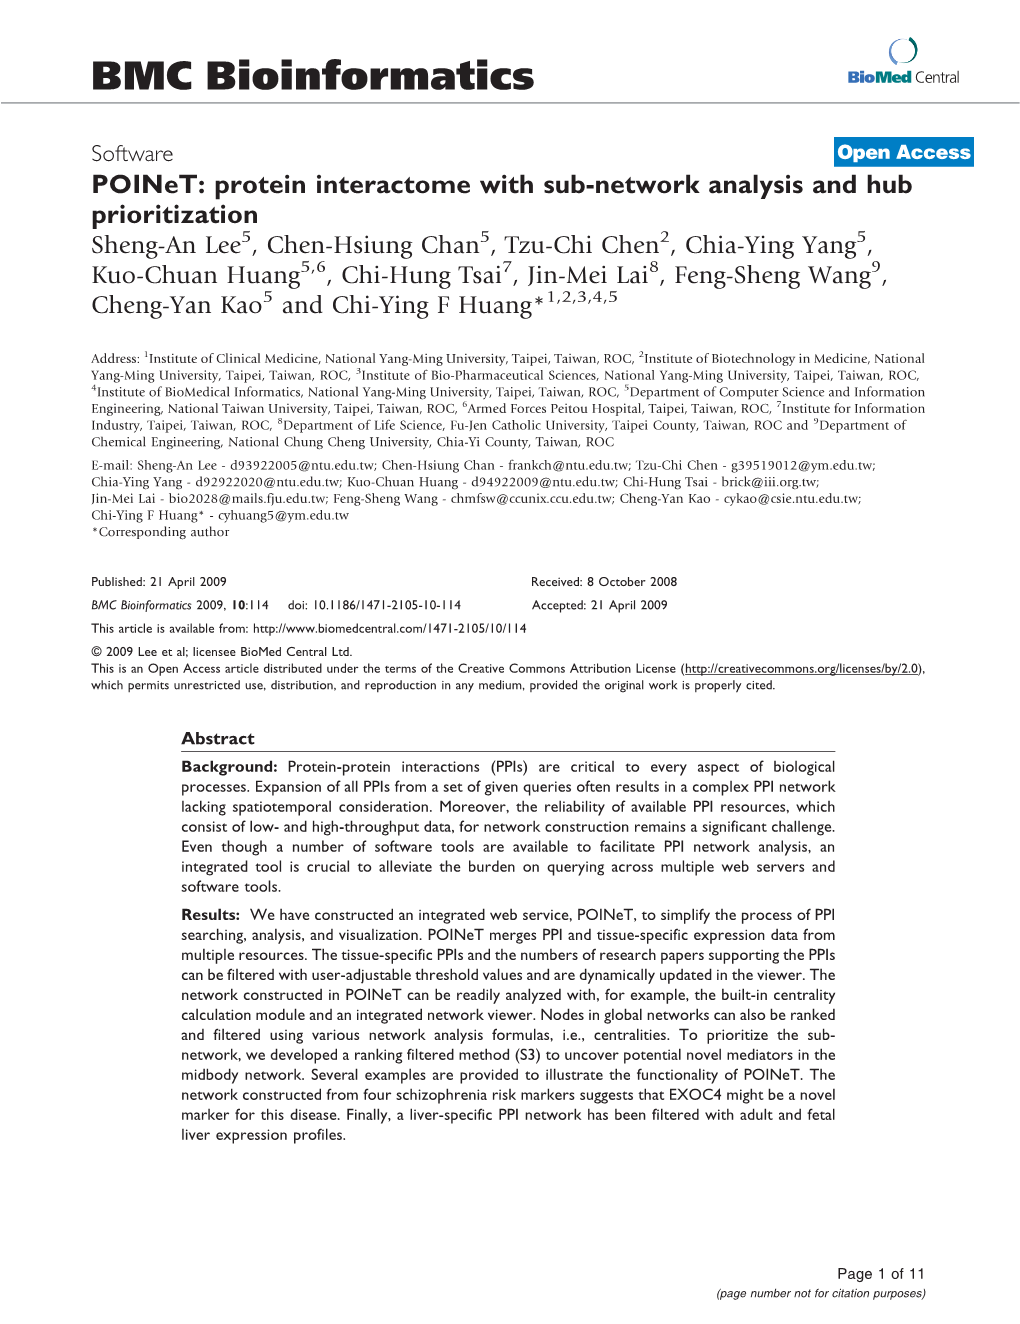 Poinet: Protein Interactome with Sub-Network Analysis and Hub